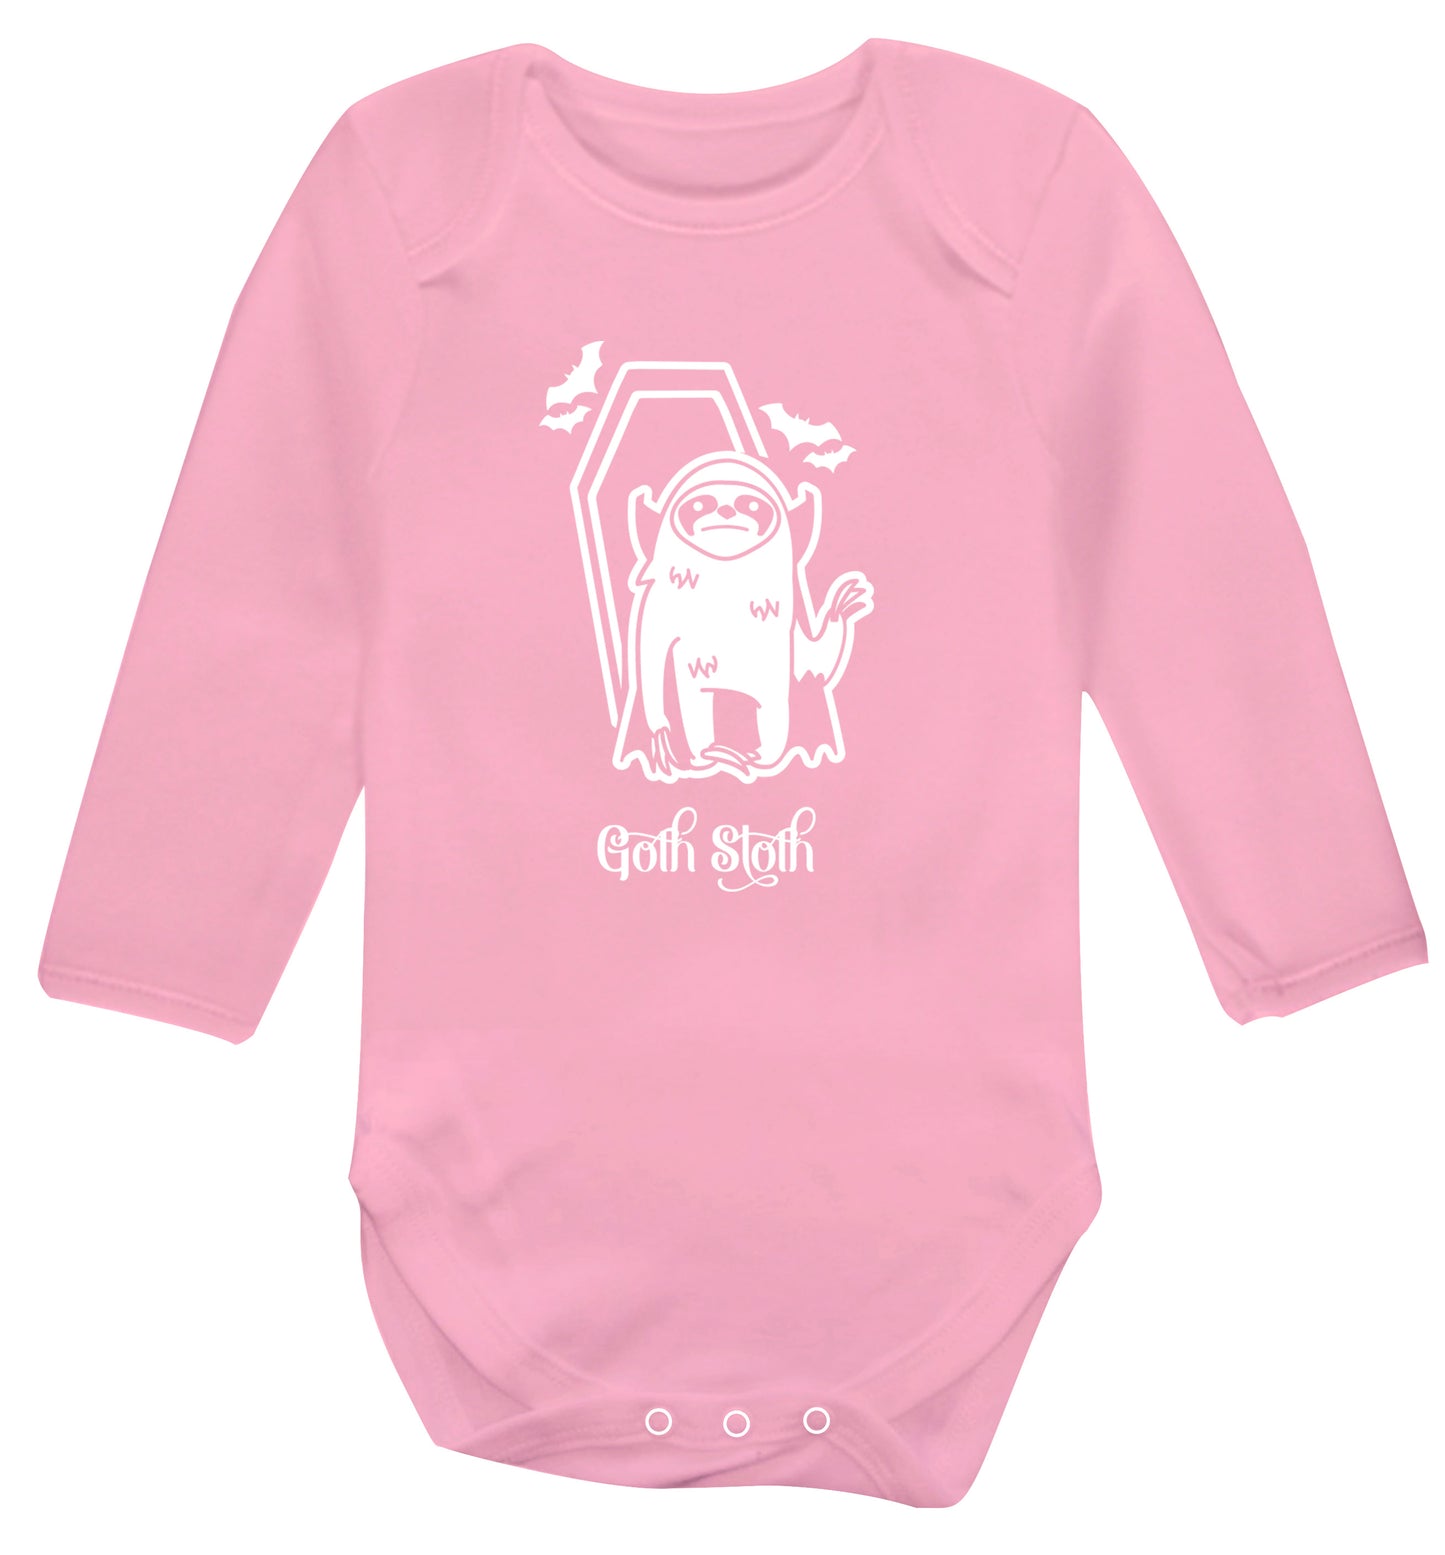 Goth Sloth Baby Vest long sleeved pale pink 6-12 months